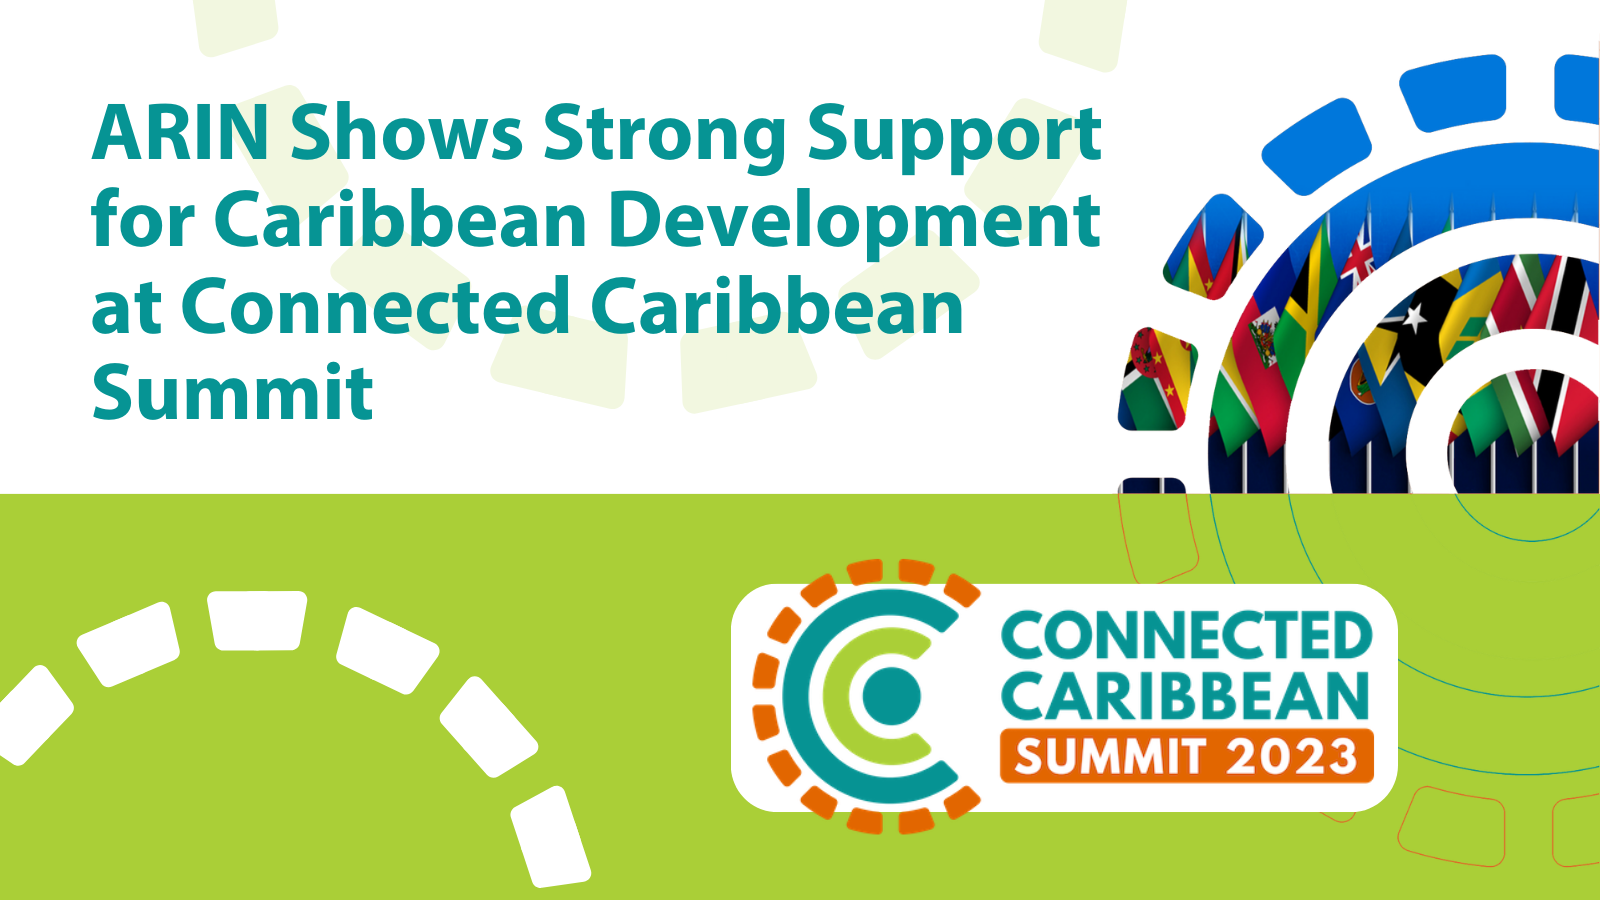 Read the blog ARIN Shows Strong Support for Caribbean Development at Connected Caribbean Summit